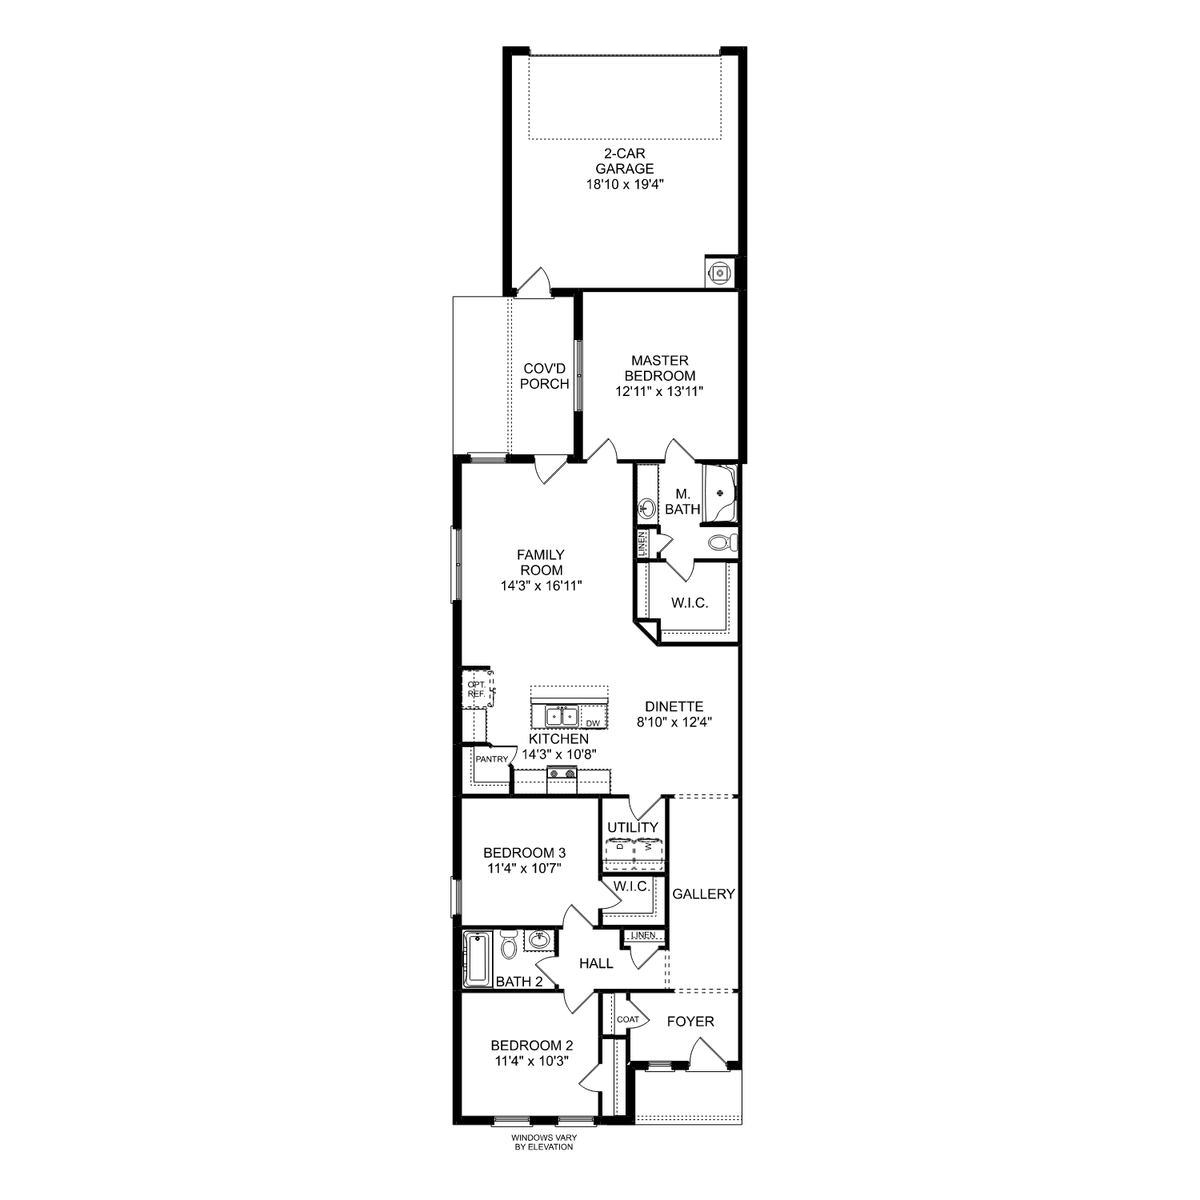 1 - The Camilla A floor plan layout for 406 Ronnie Drive in Davidson Homes' Cain Park community.